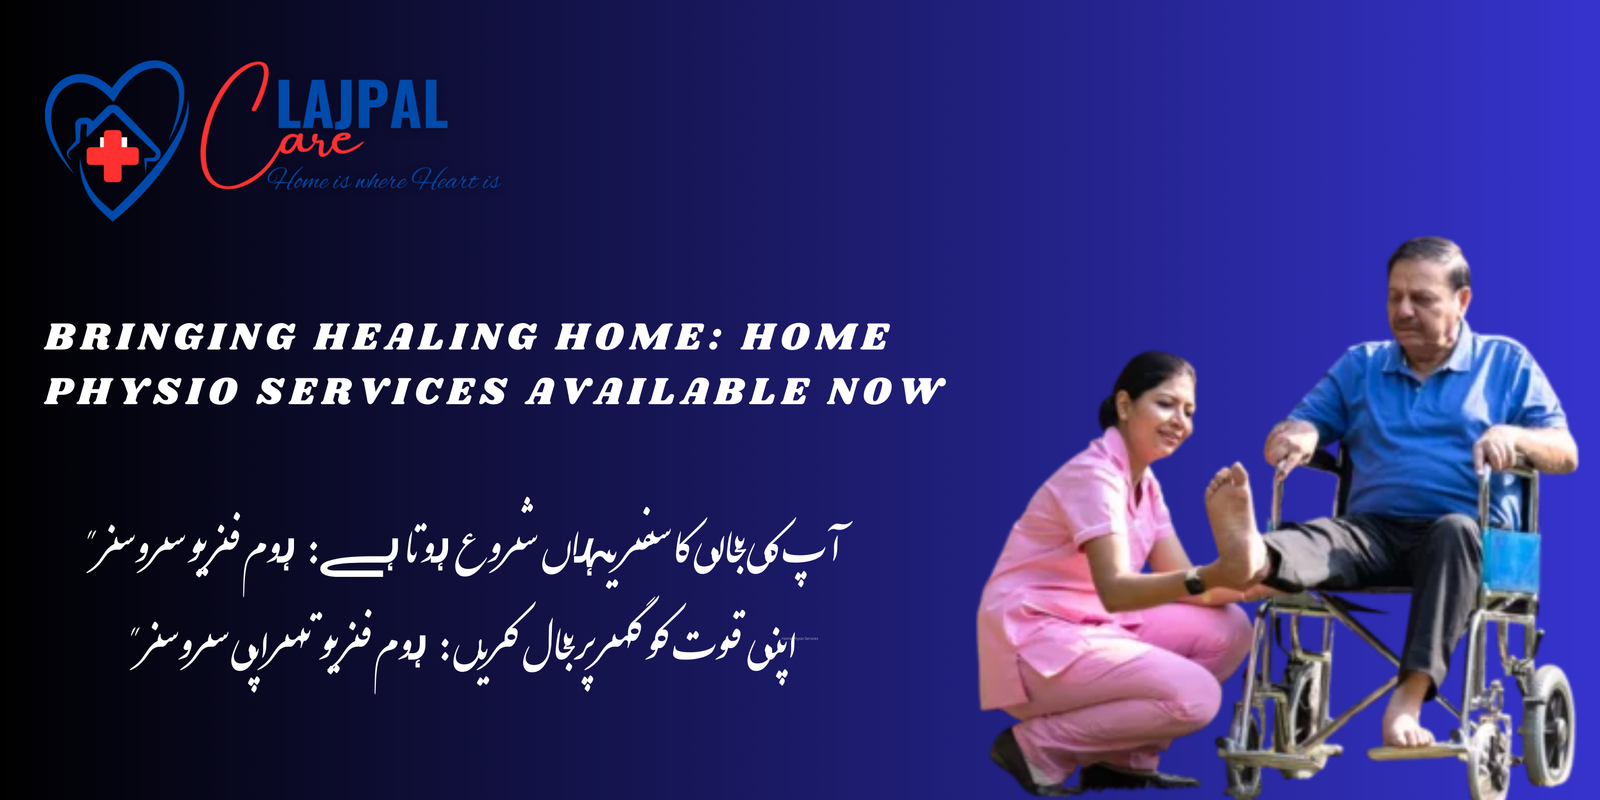 Home Elderly Care Services in Islamabad and Rawalpindi